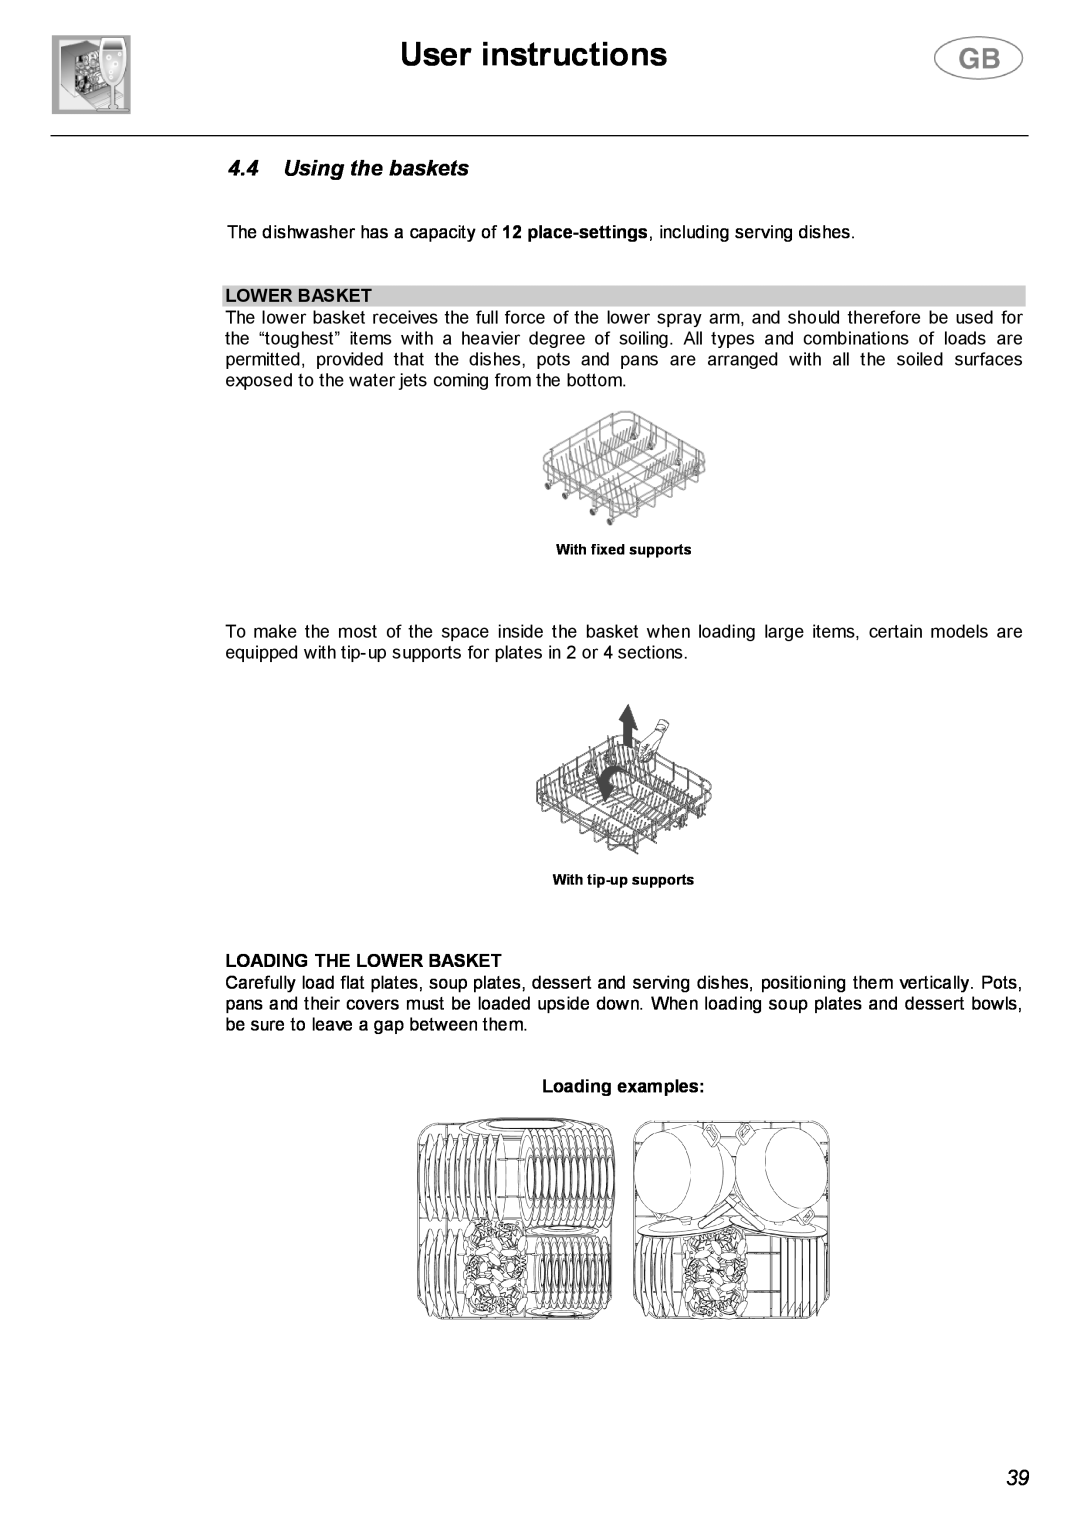 Smeg LVF32G instruction manual Using the baskets, Loading The Lower Basket, Loading examples, User instructions 